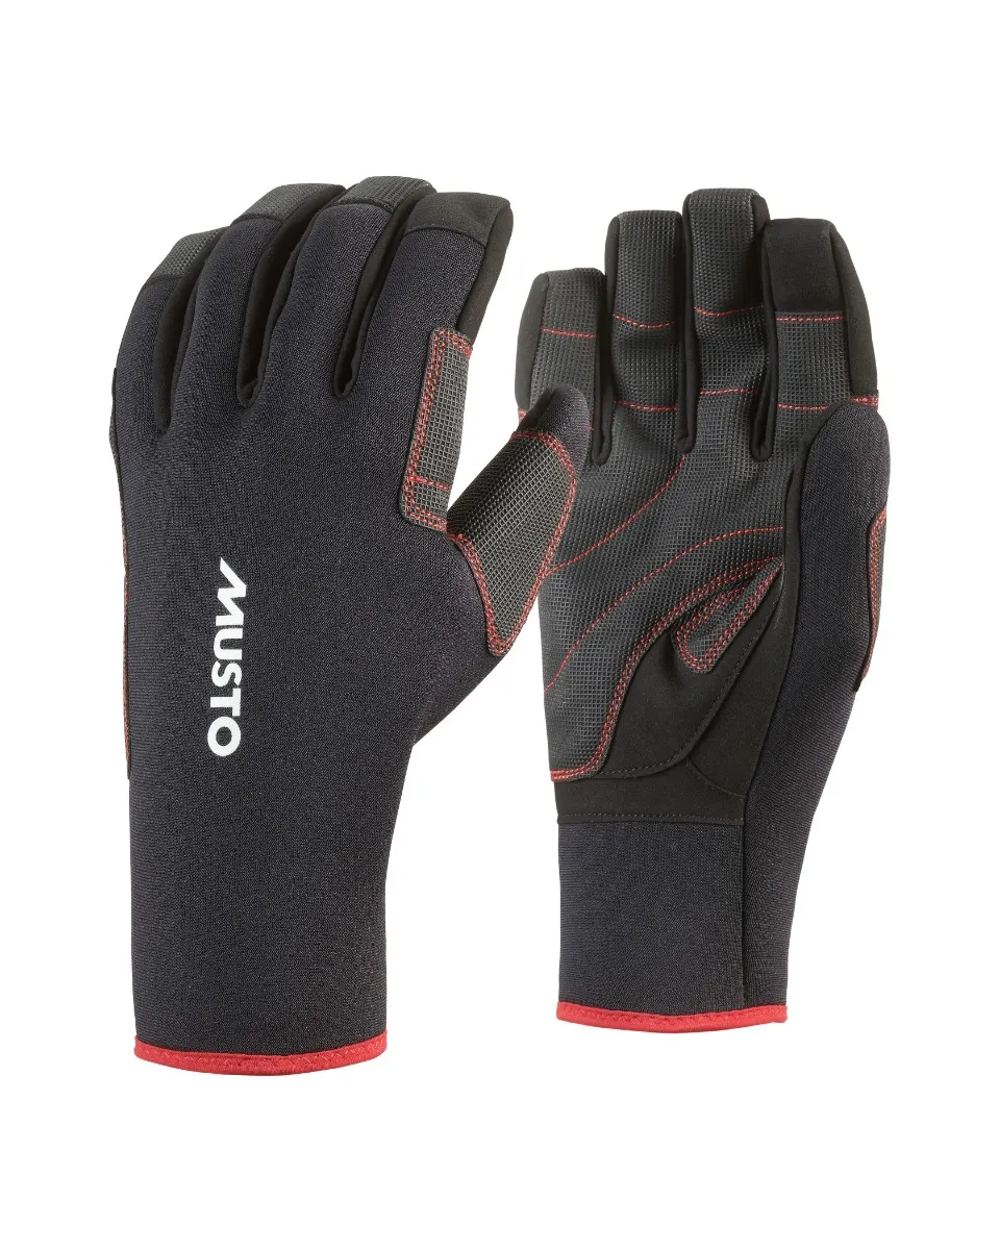 Musto Performance All Weather Gloves in Black